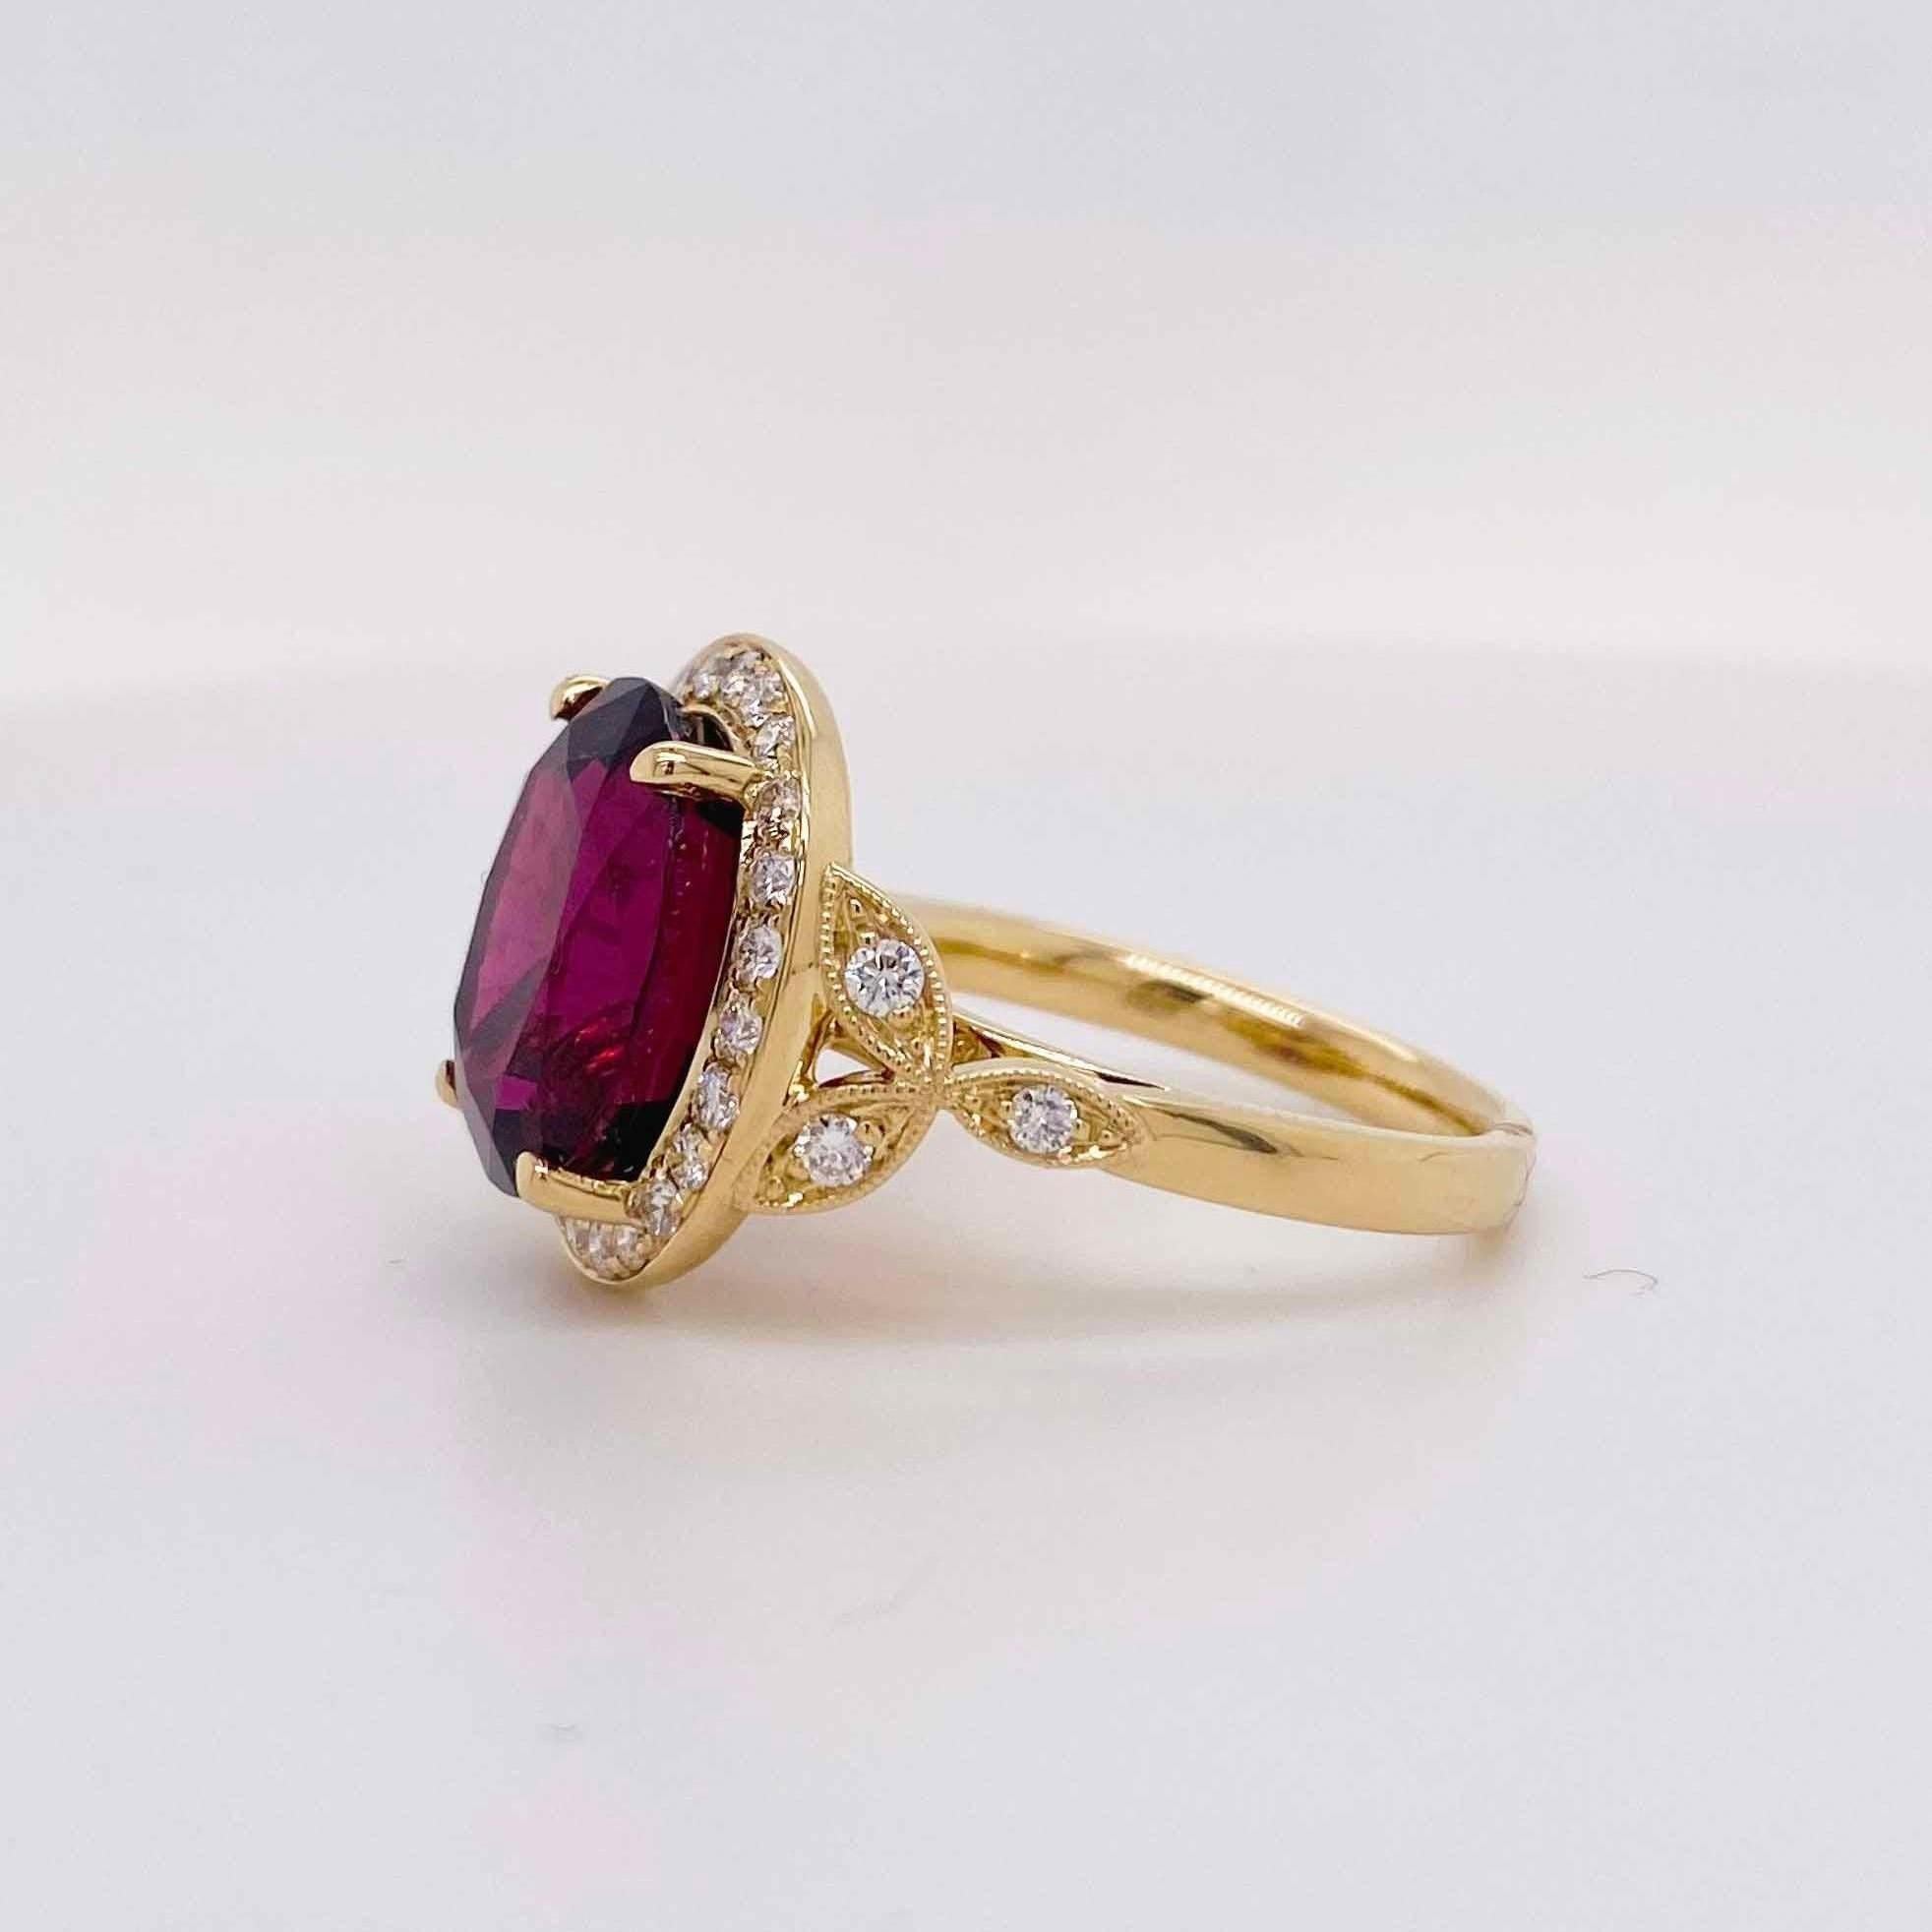 For Sale:  Garnet Diamond Ring, Yellow Gold, One-of-a-Kind 9.37Ct Garnet and Diamond Halo 2